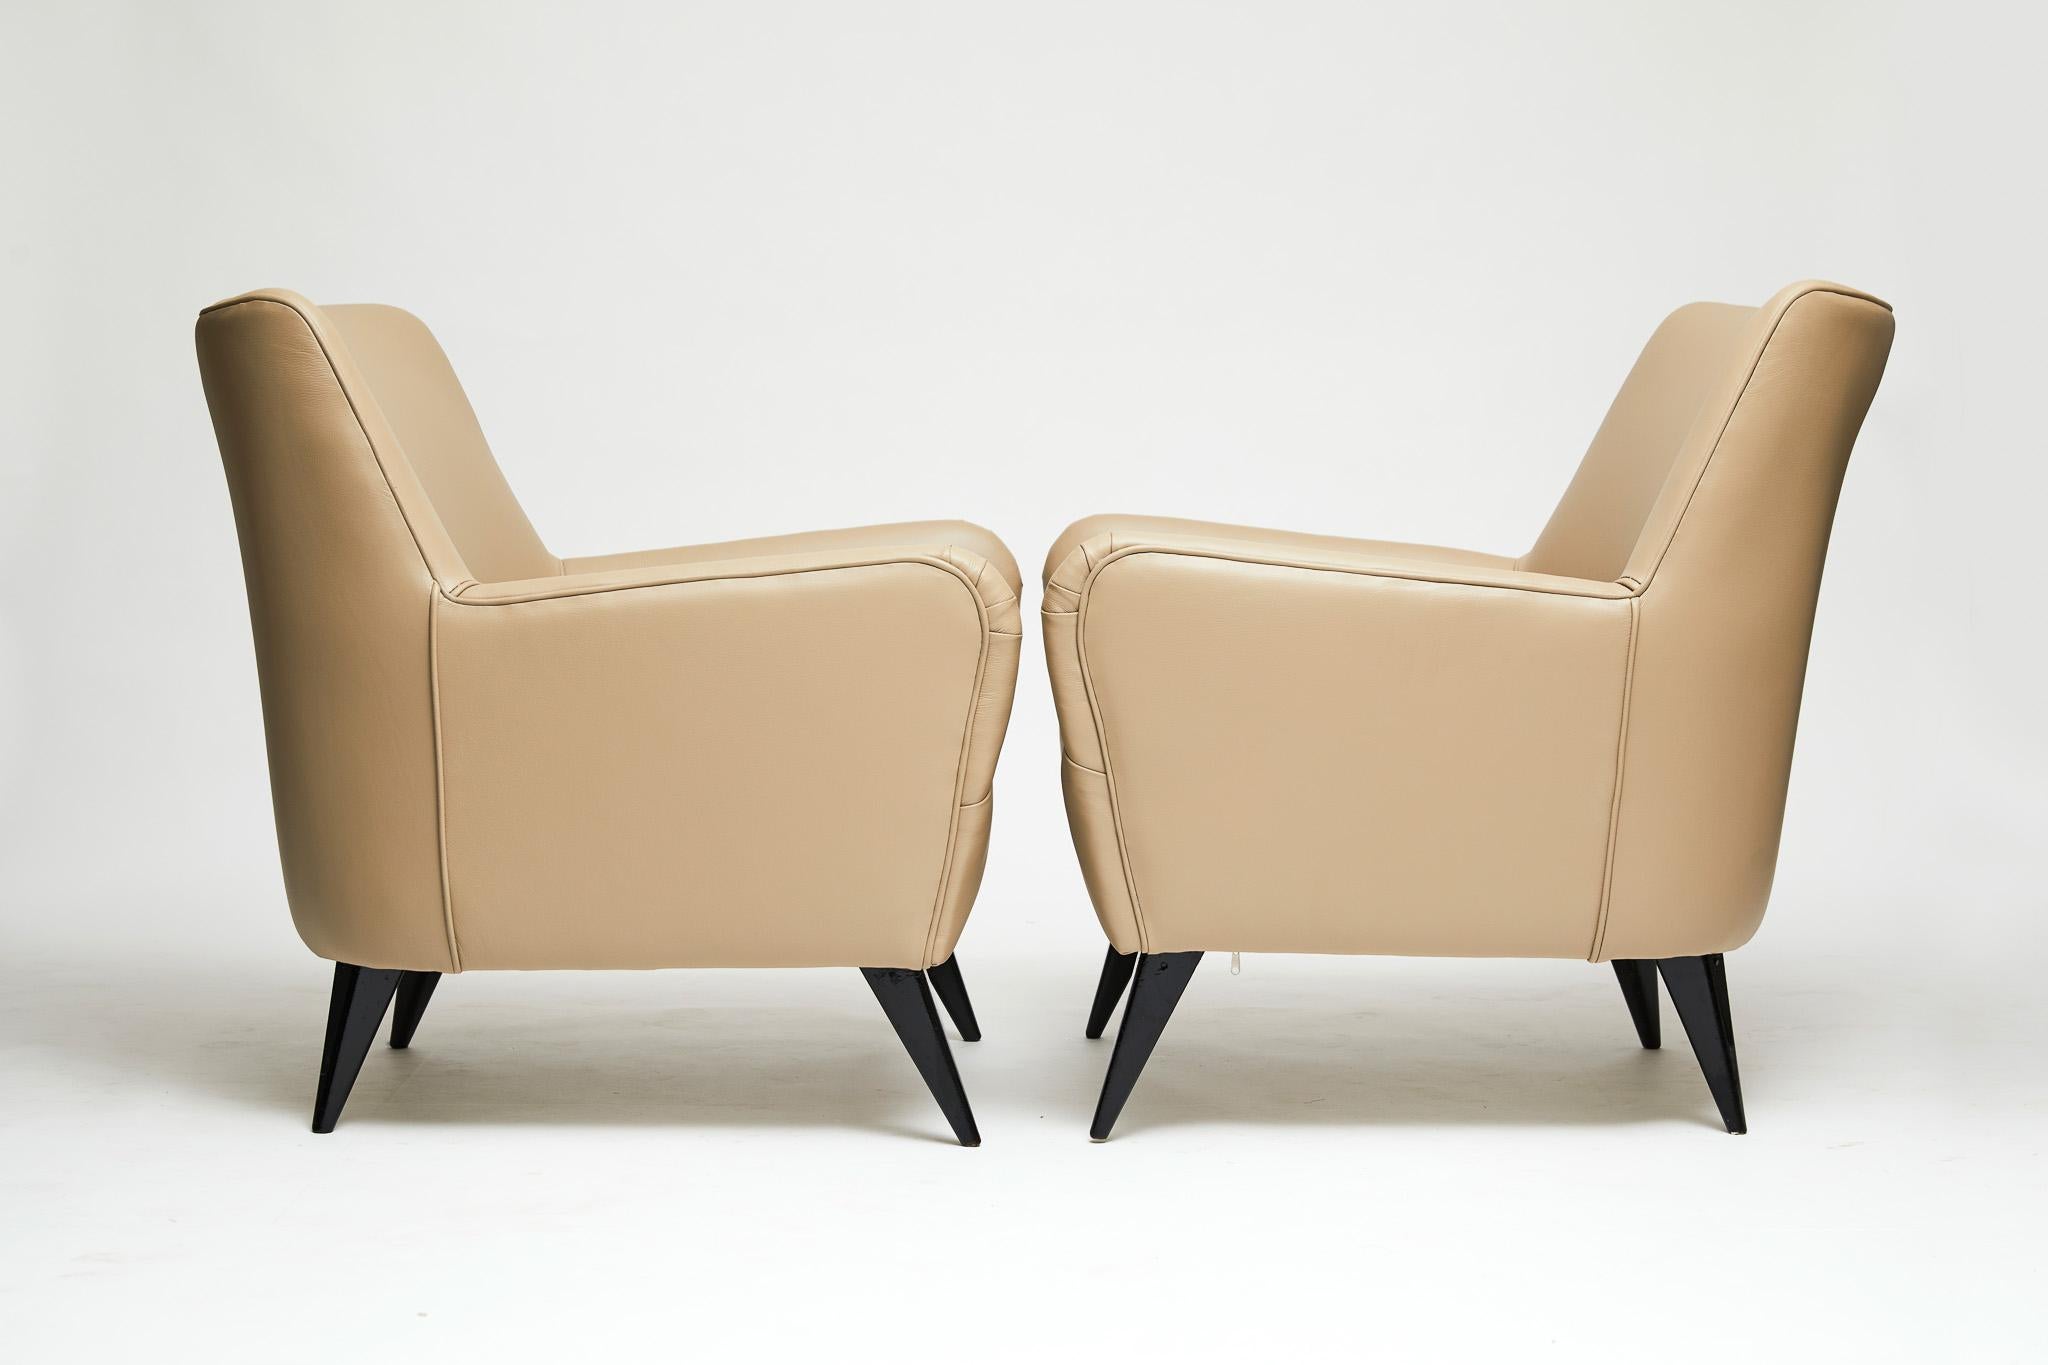 20th Century Mid-Century Modern Armchairs in Leather & Wood by Joaquim Tenreiro, 1955, Brazil For Sale